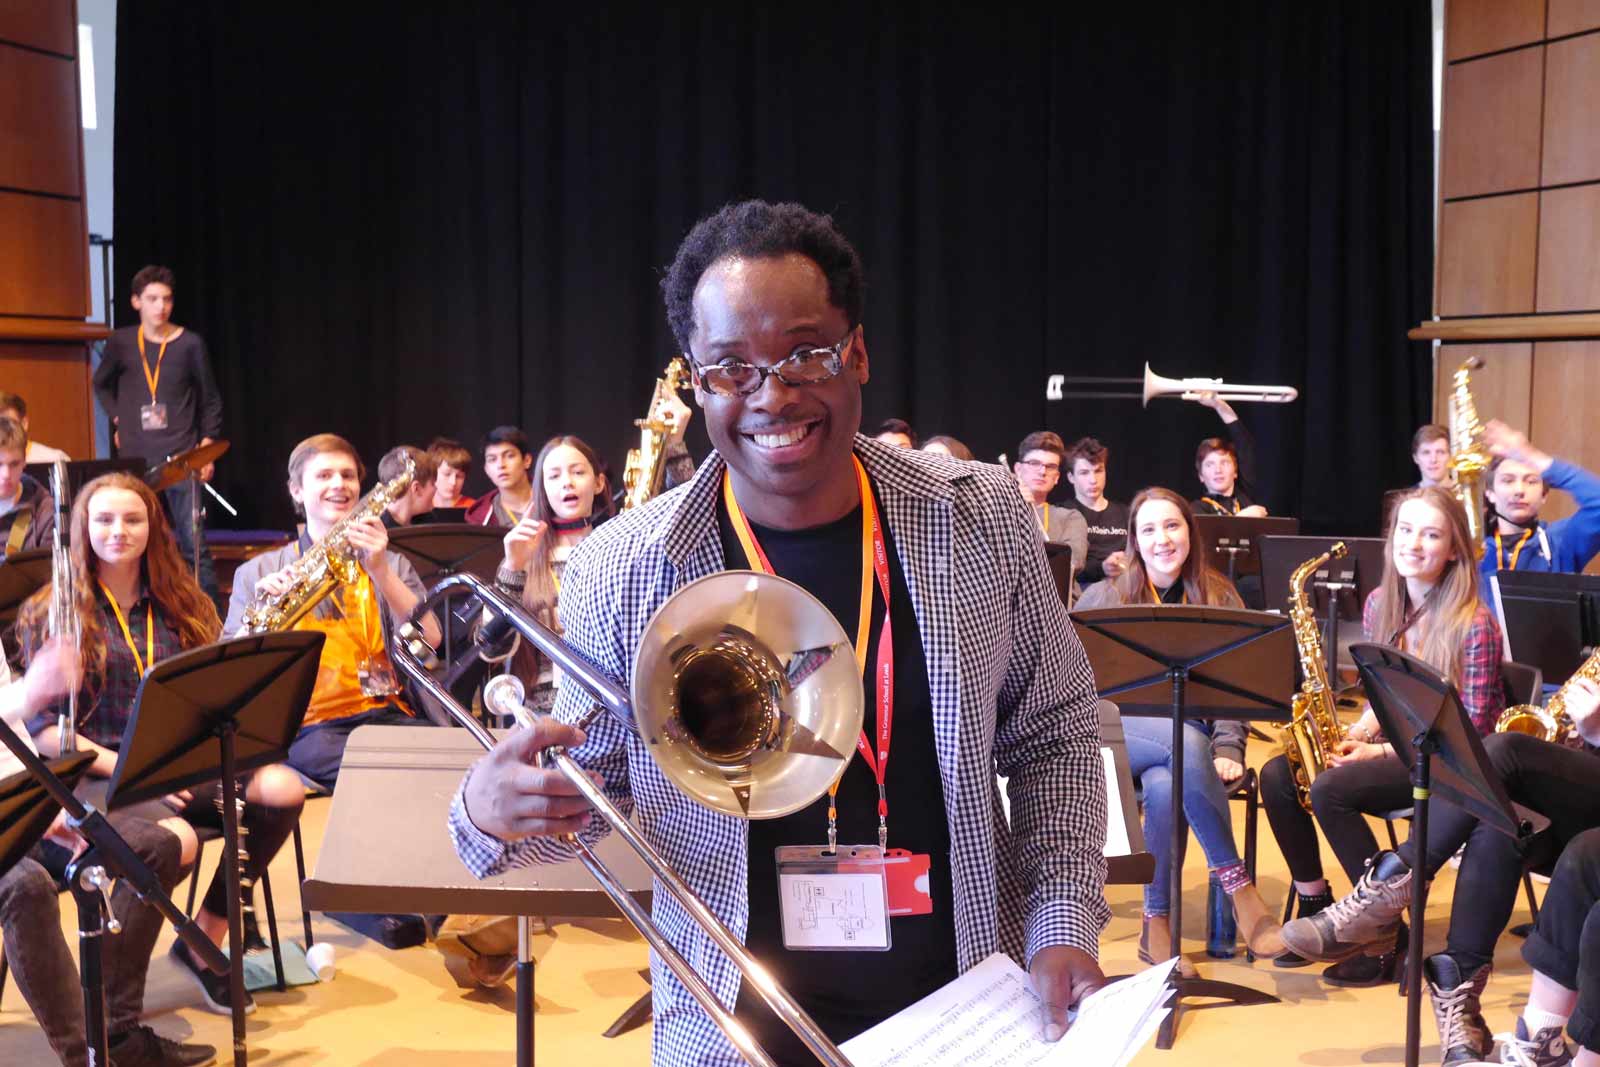 Dennis Rollins in rehearsal with students from Harrogate, Leeds and Garforth at The Grammar School at Leeds